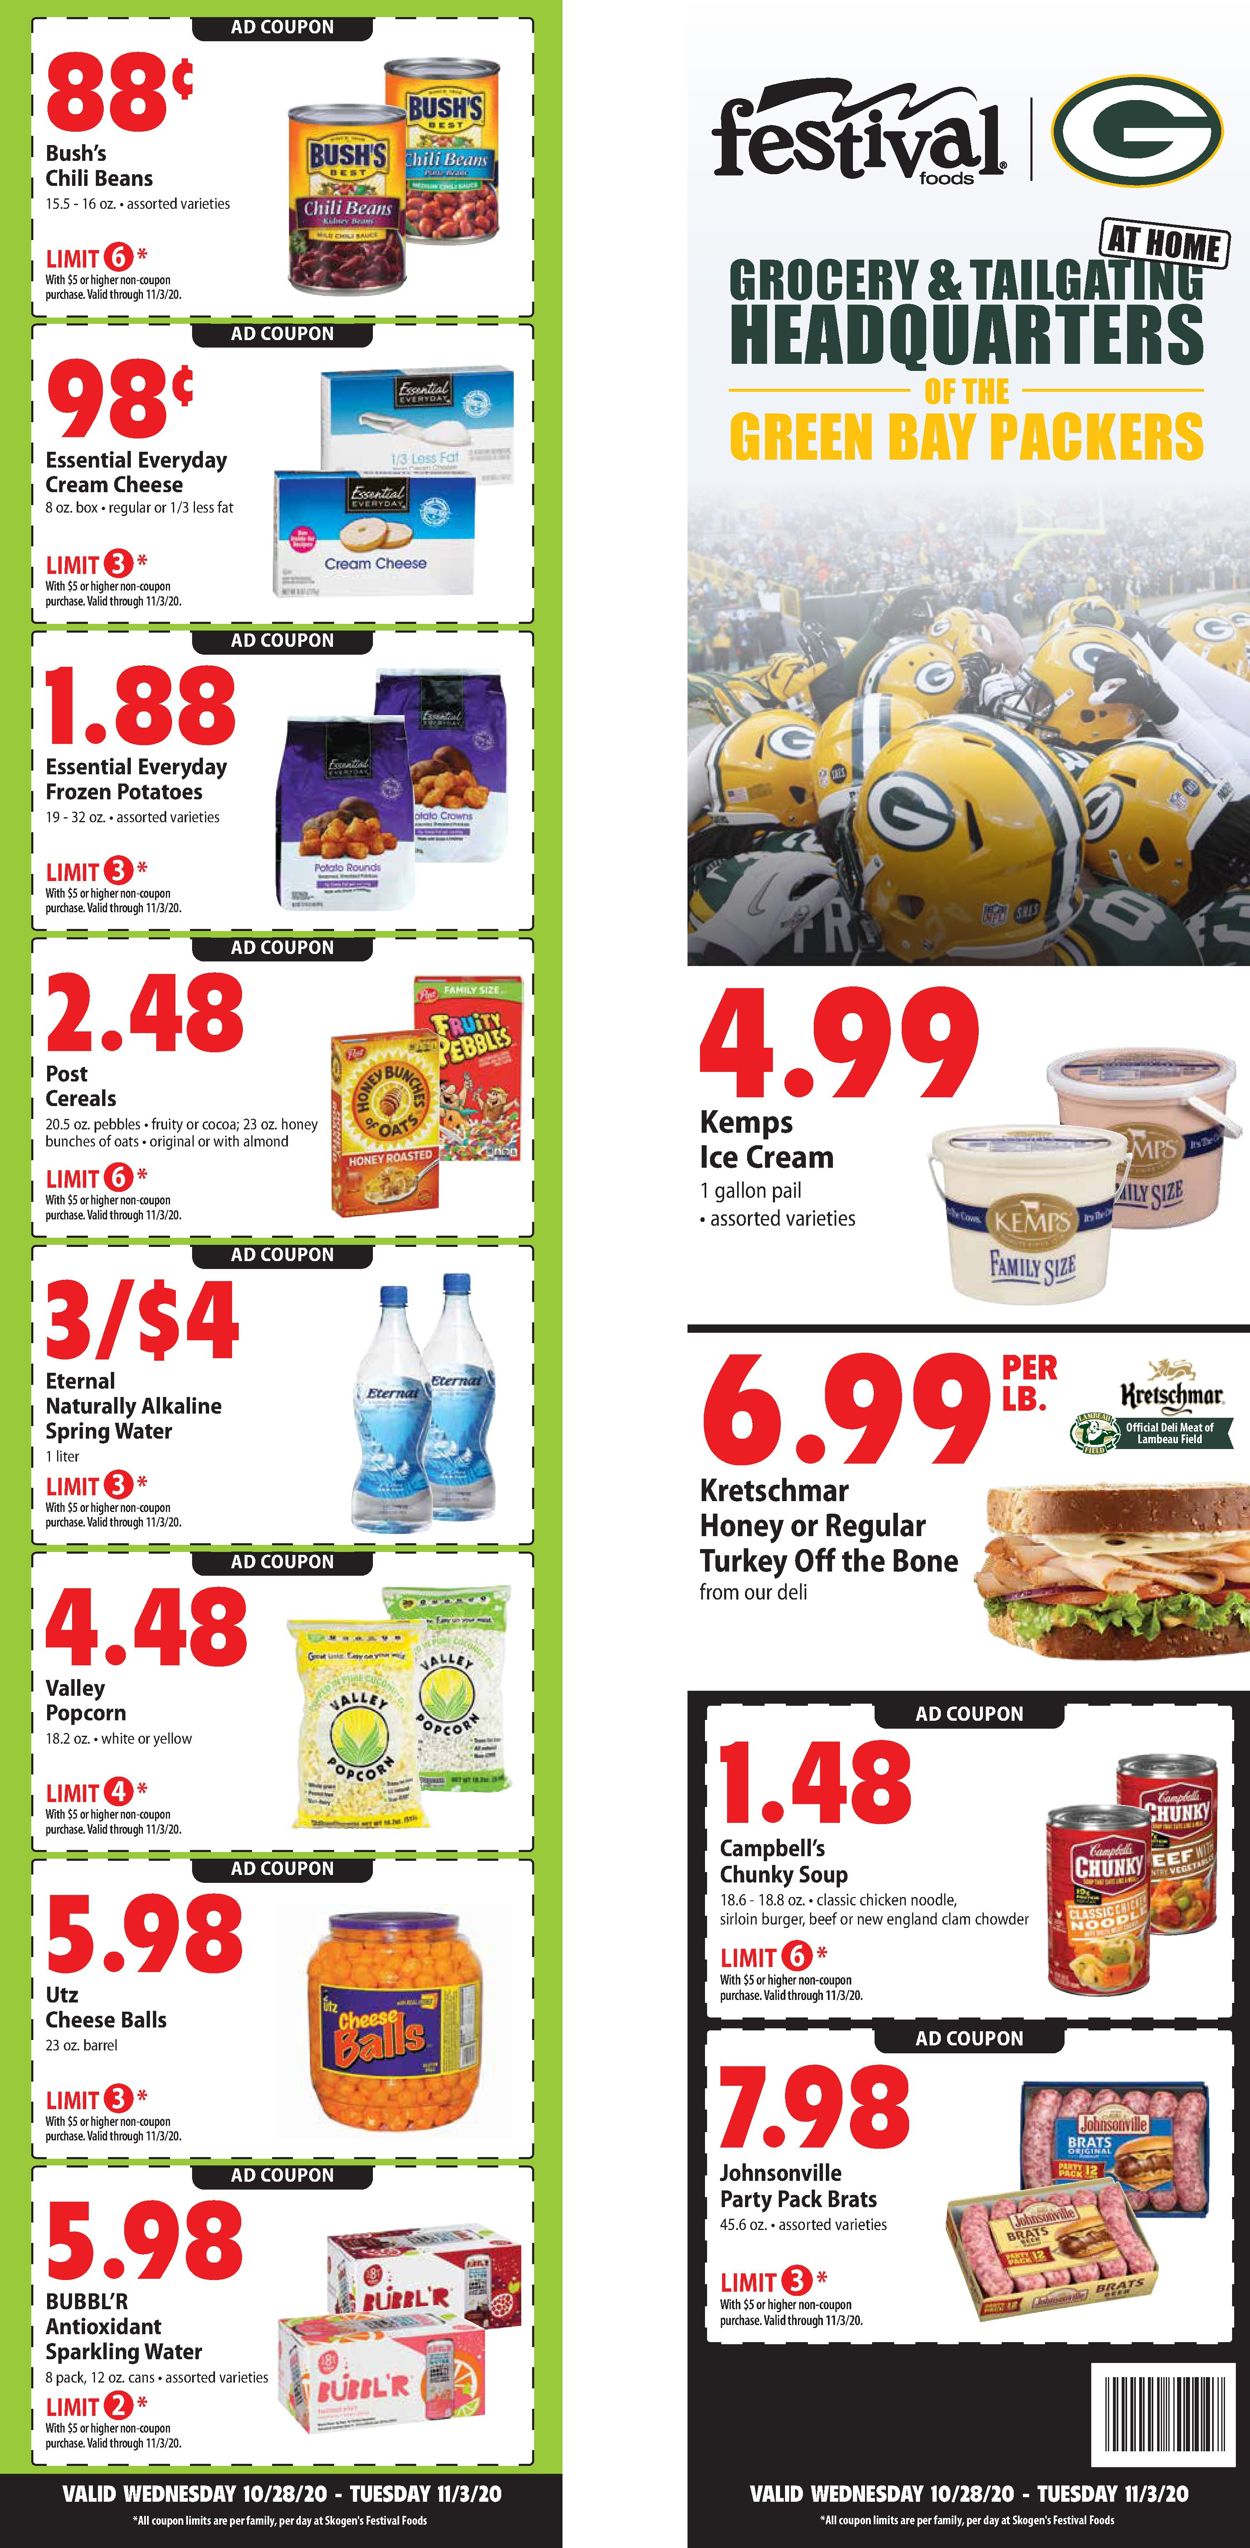 Festival Foods Current weekly ad 10/28 11/03/2020